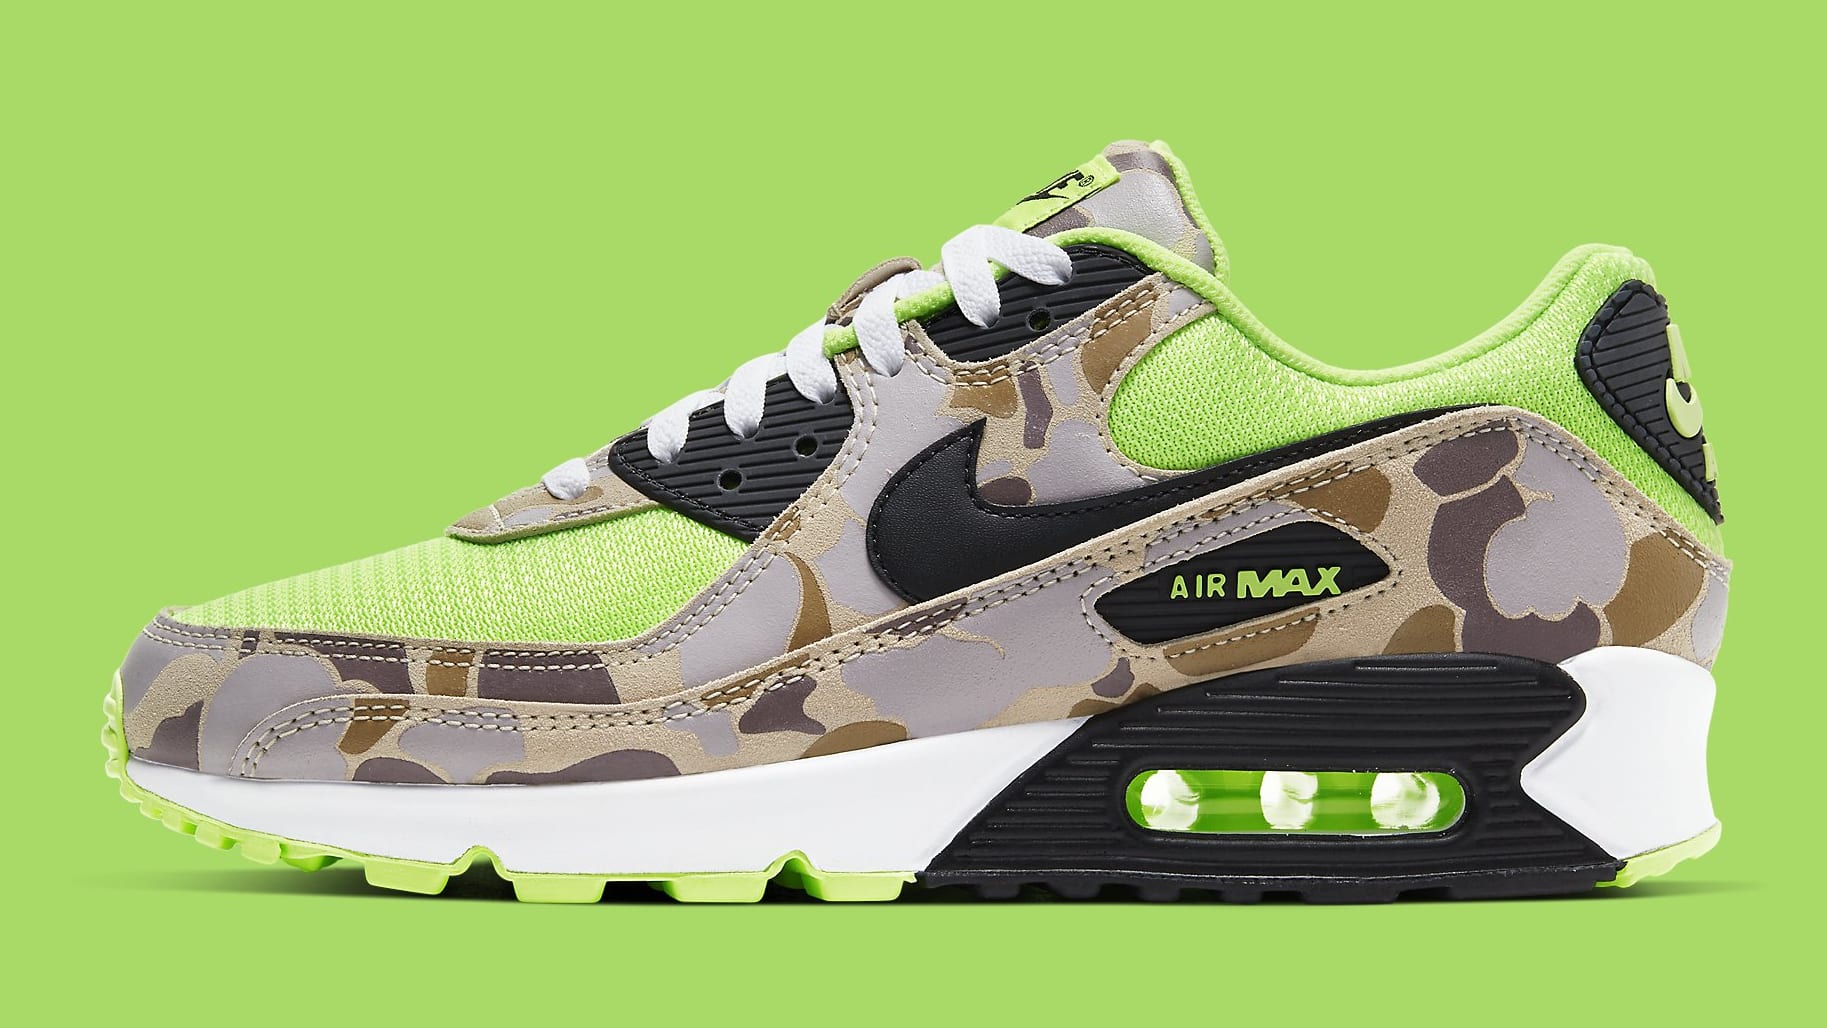 Nike Air Max 90 'Volt Duck Camo' Release Date | Sole Collector